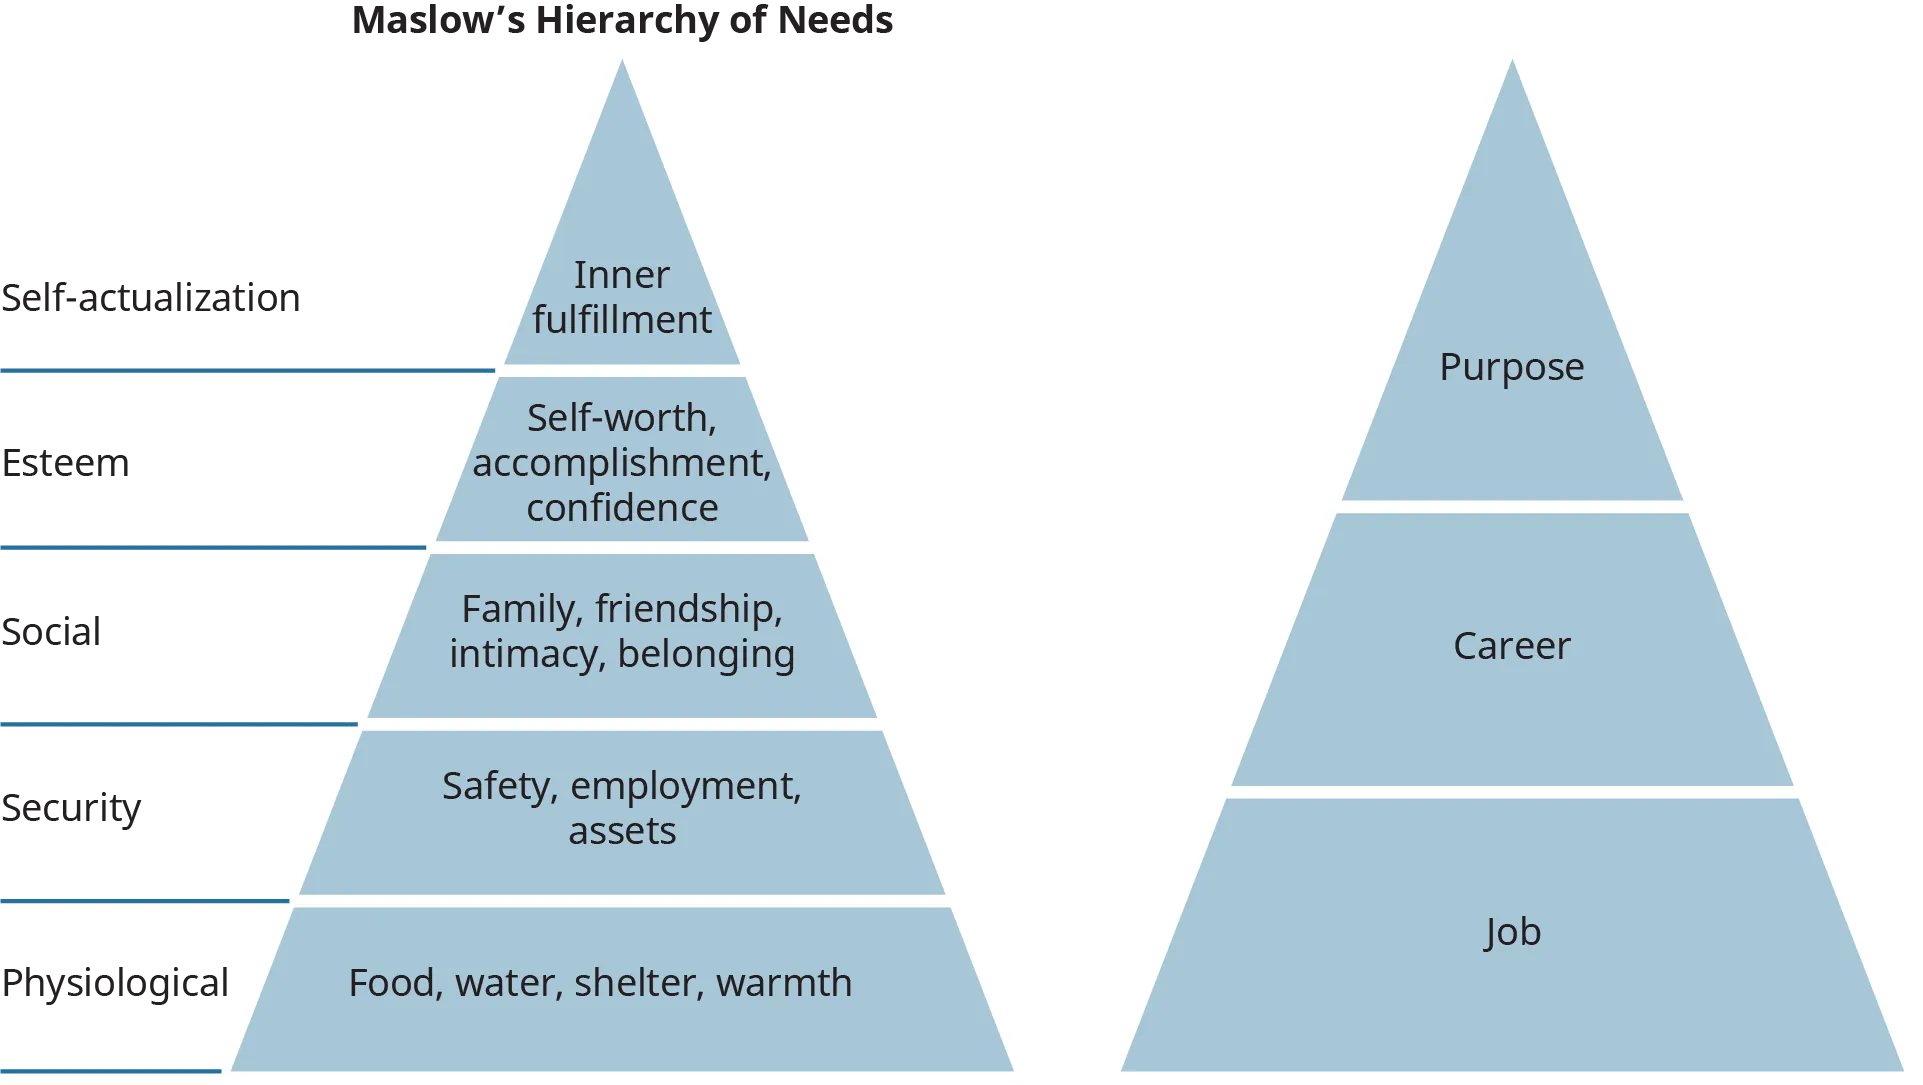 A set of two pyramid diagrams illustrate Maslow’s hierarchy of needs and the three levels of job career purpose.